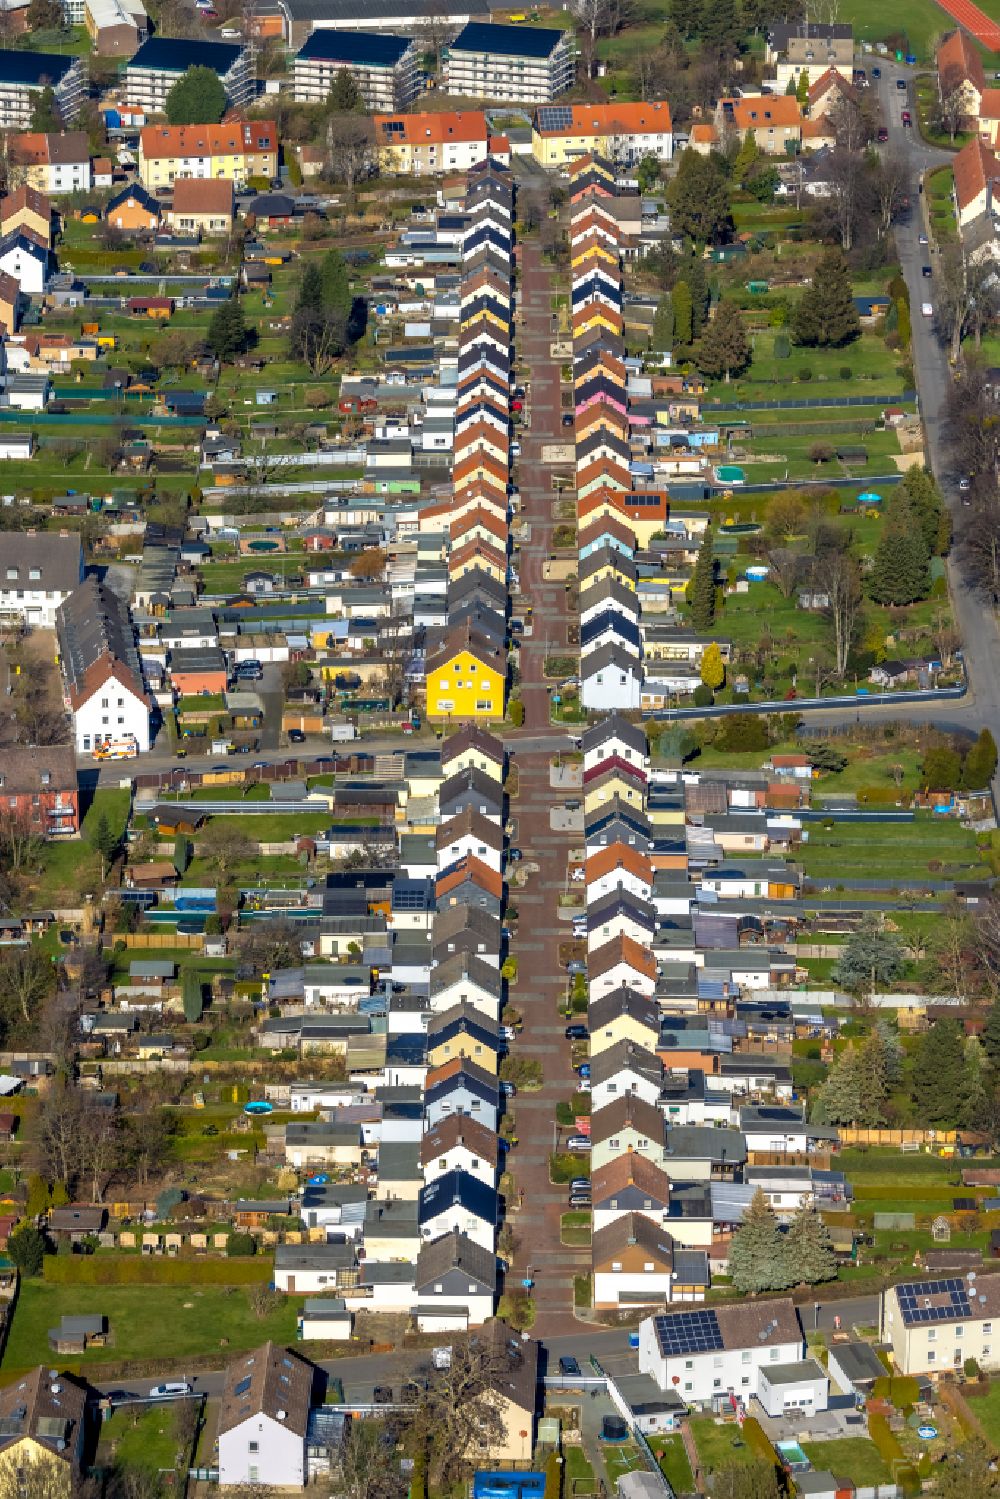 Unna from above - Residential area of a single-family house settlement, historical colliery settlement on Friedrichstrasse in Unna, North Rhine-Westphalia, Germany